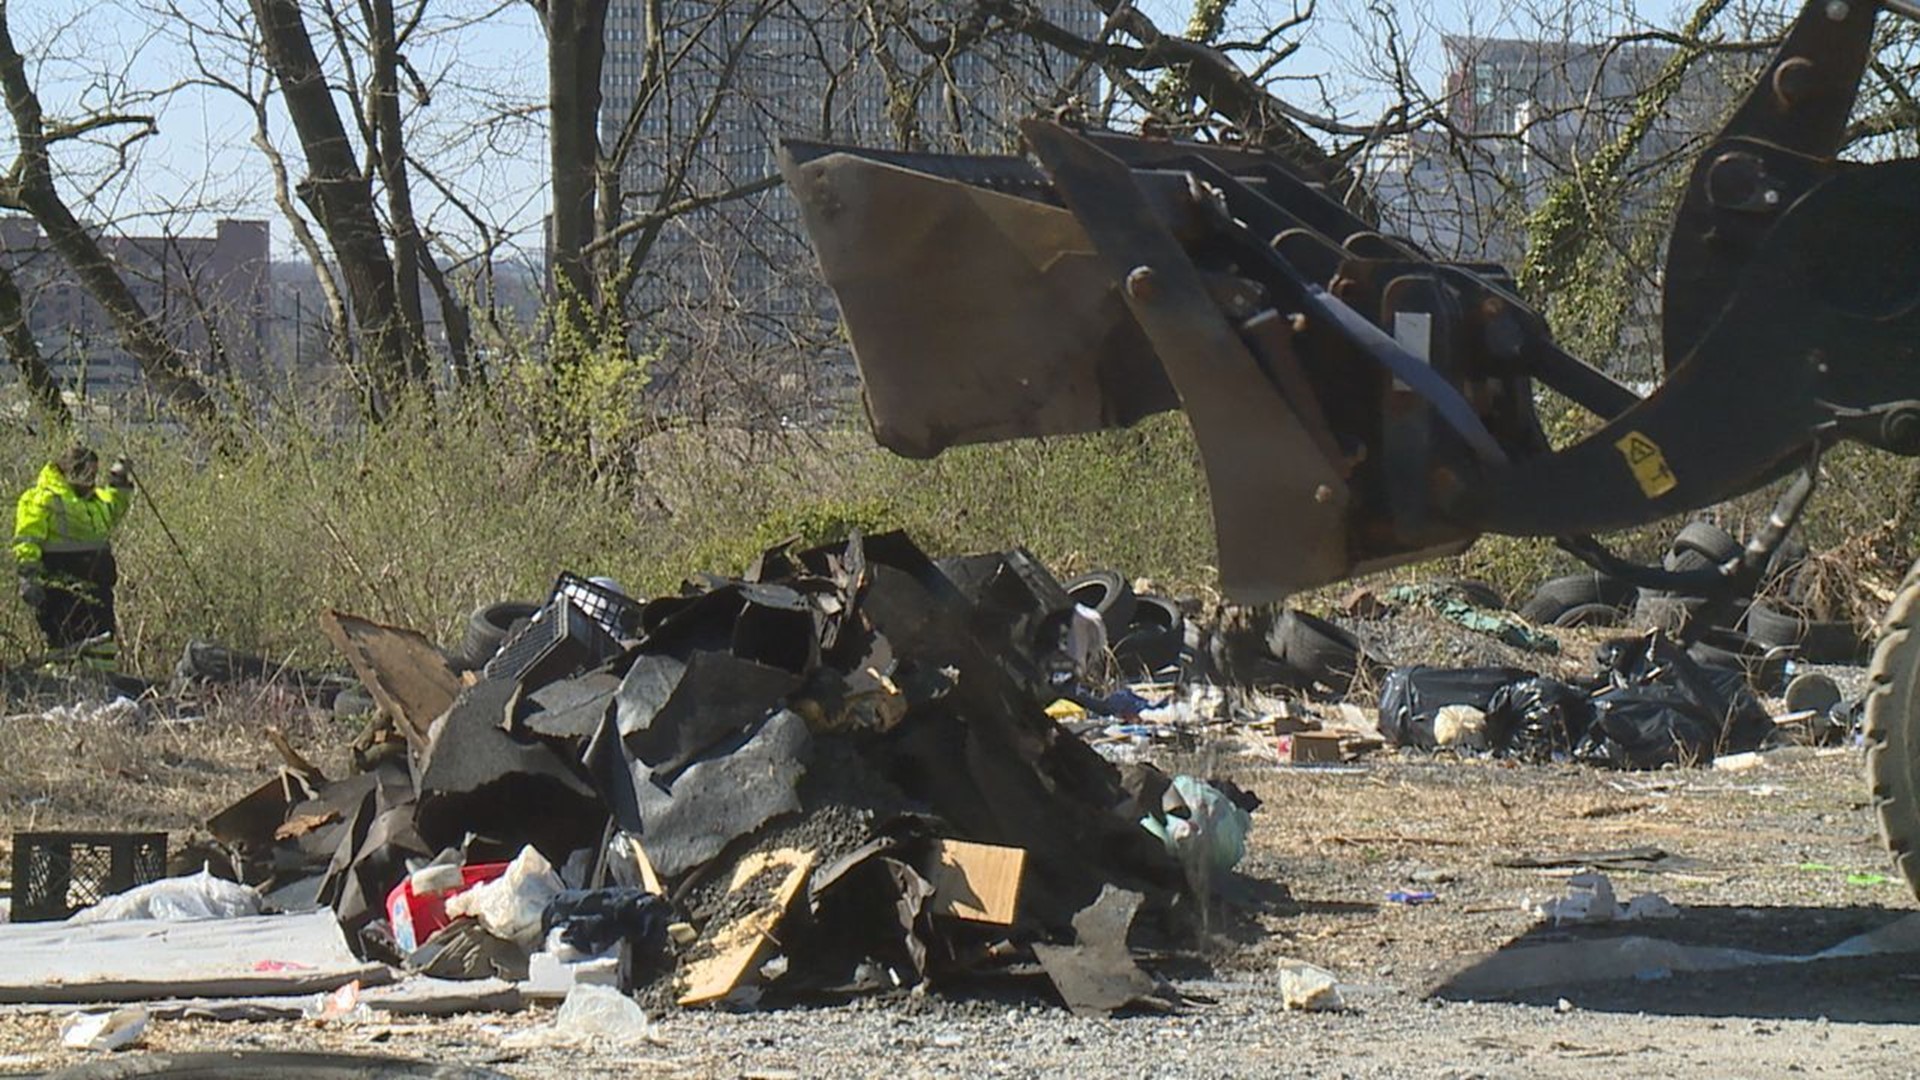 Officials in Harrisburg announced their newest initiative today to end illegal dumping with harsher penalties expected to be put in place.